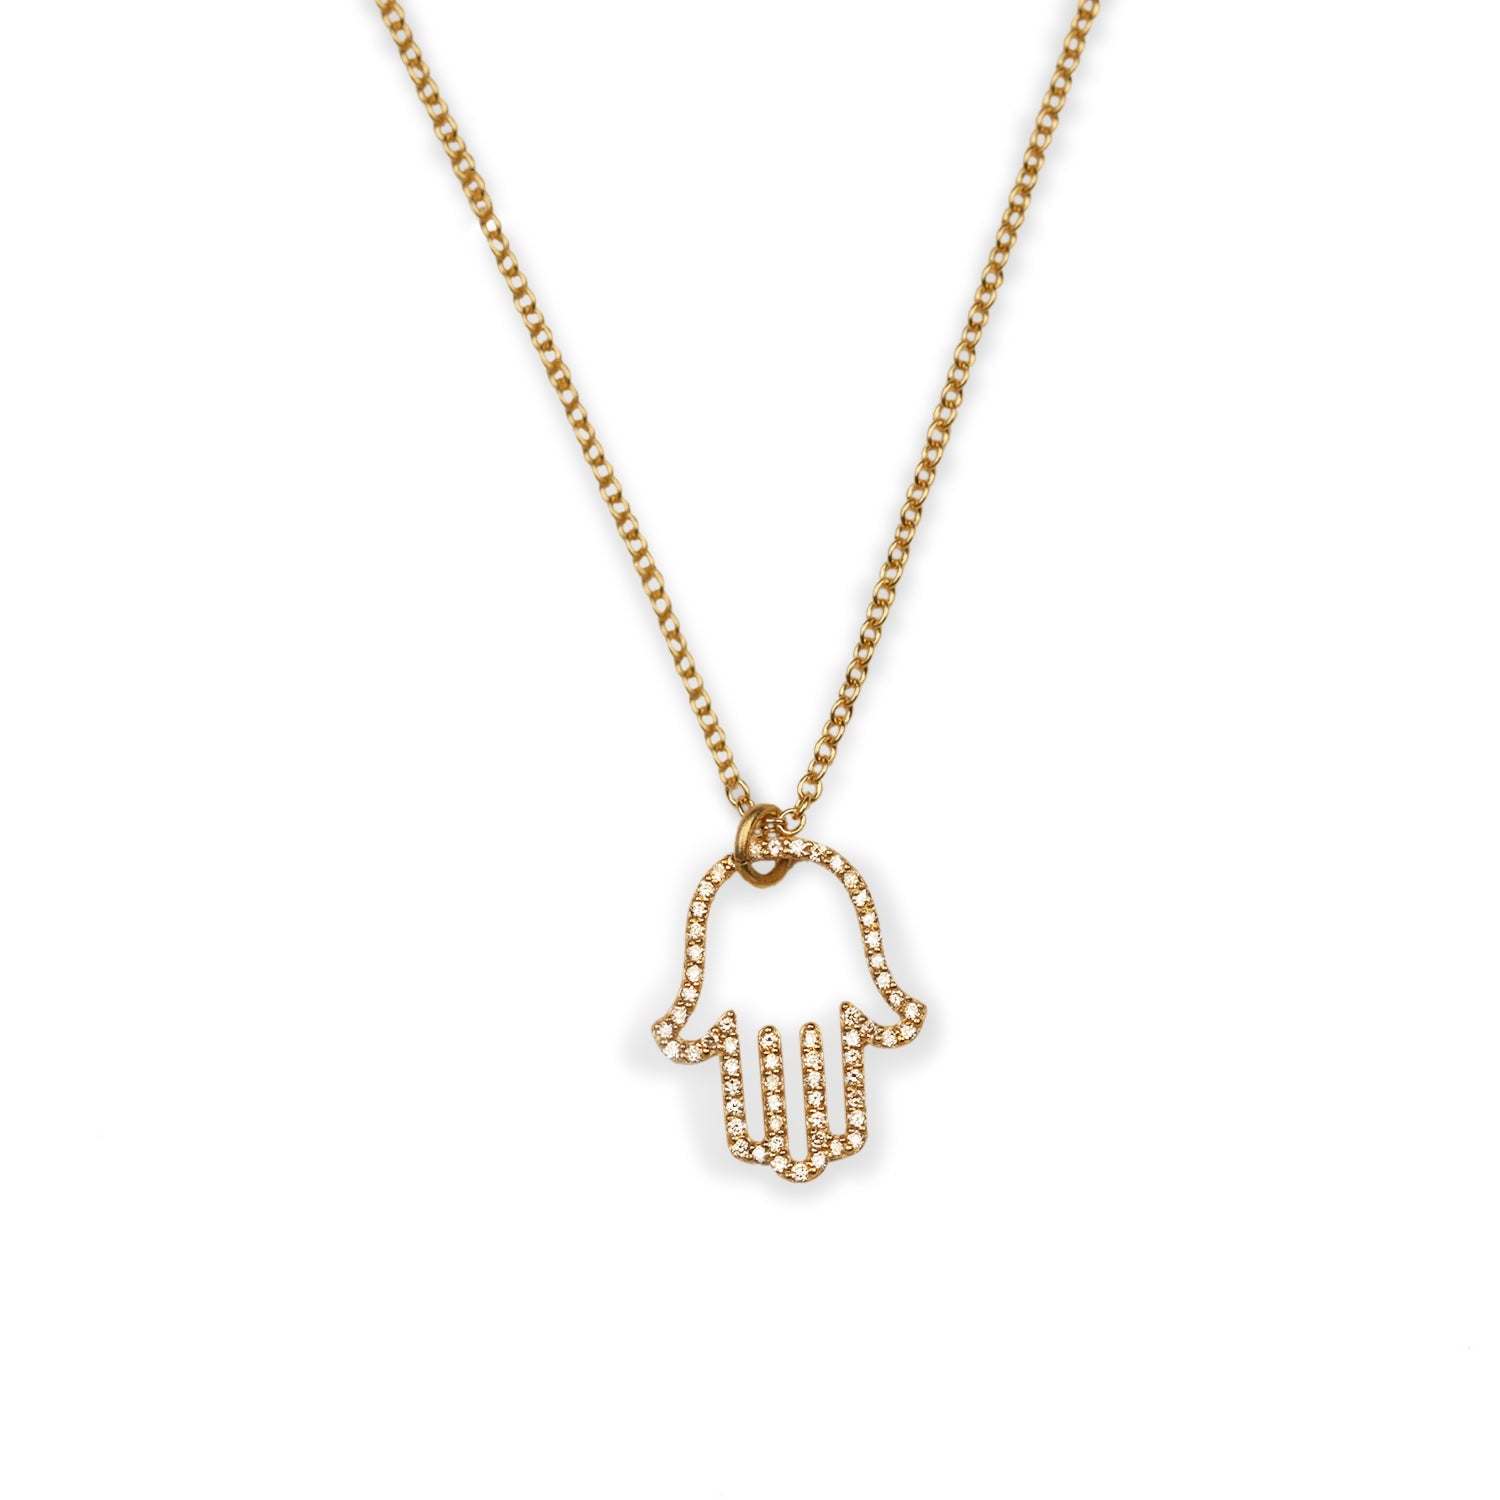 Hamsika Necklace | Pave | Yellow Gold